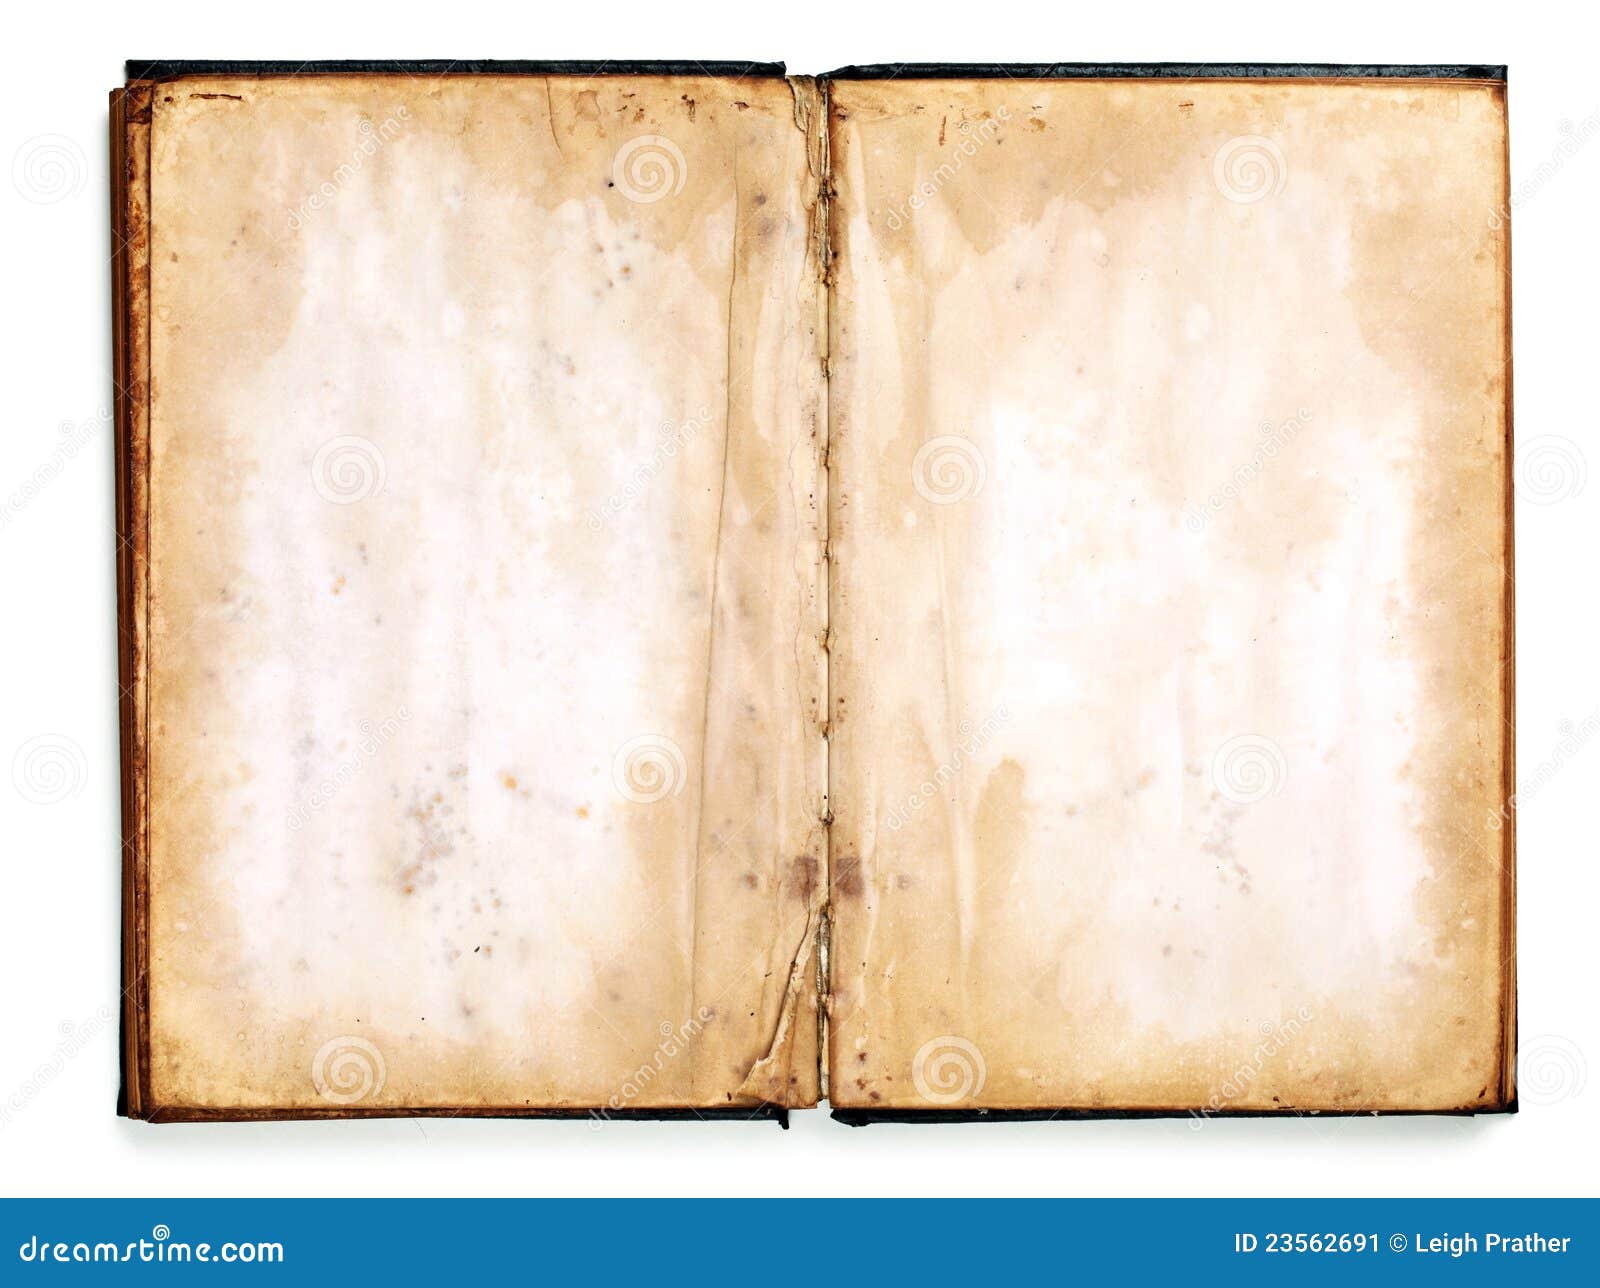 Old Blank Book Stock Image - Image: 23562691